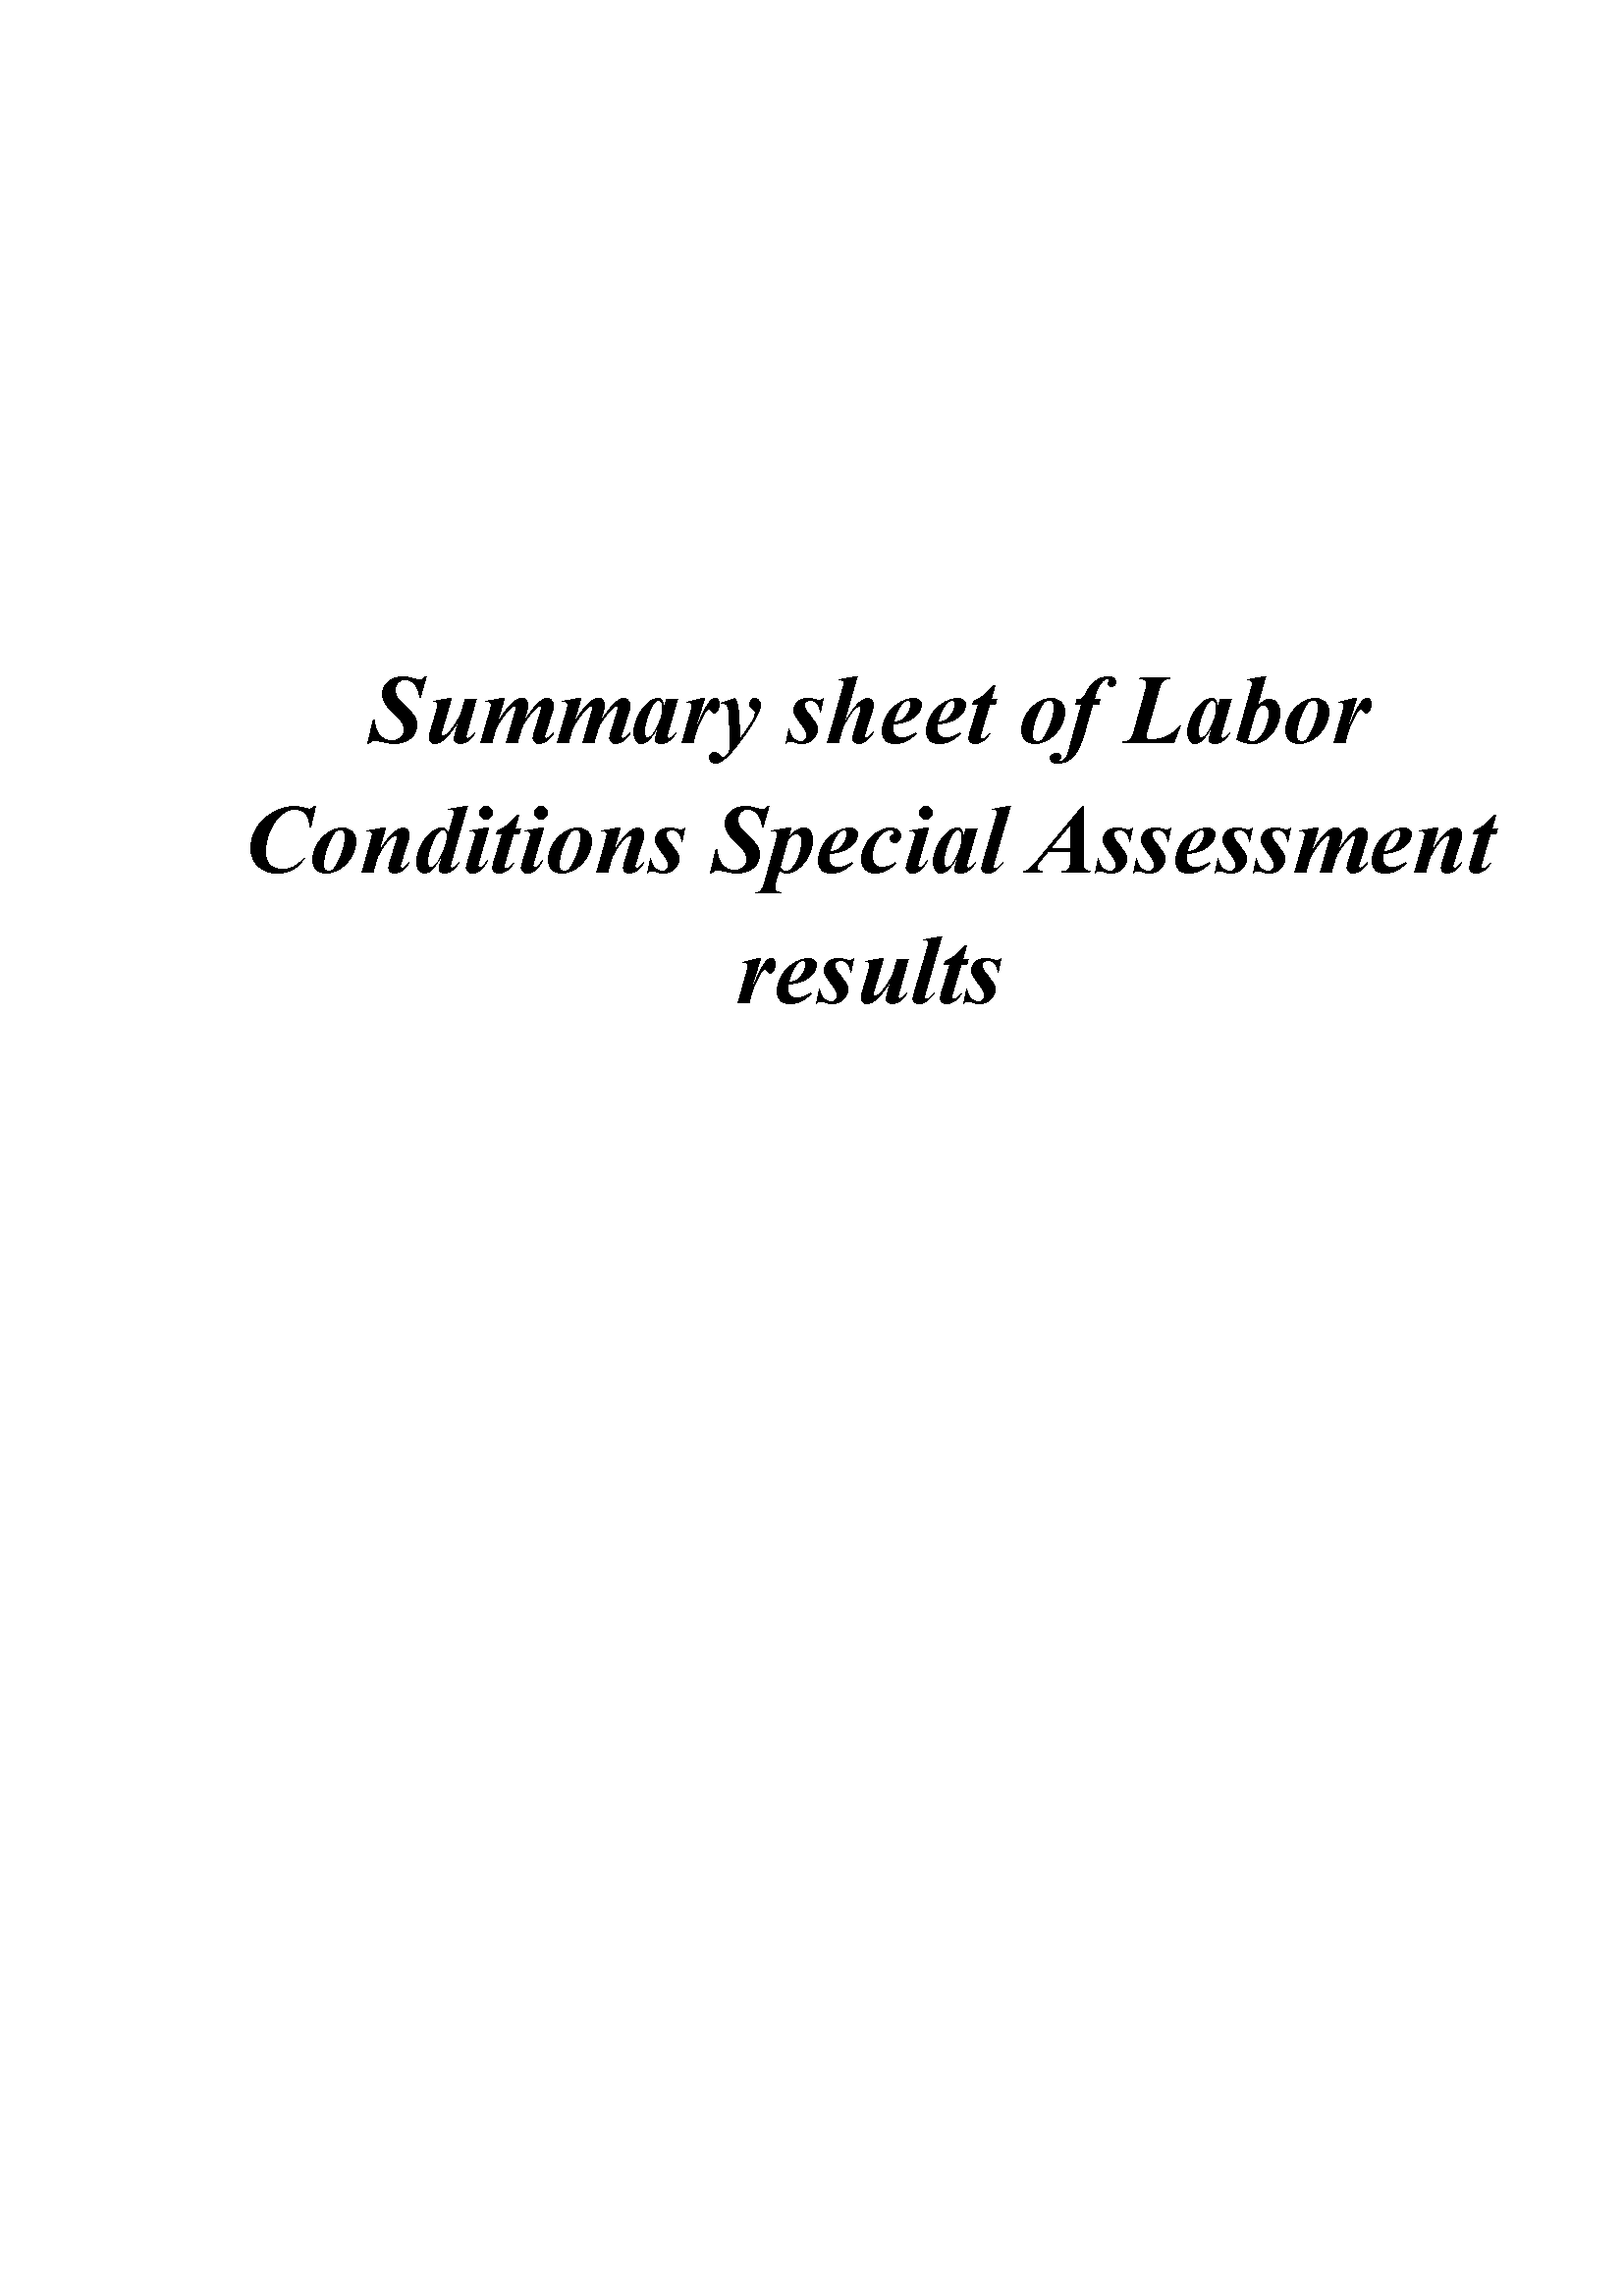 Summary sheet of Labor Conditions Special Assessment results 